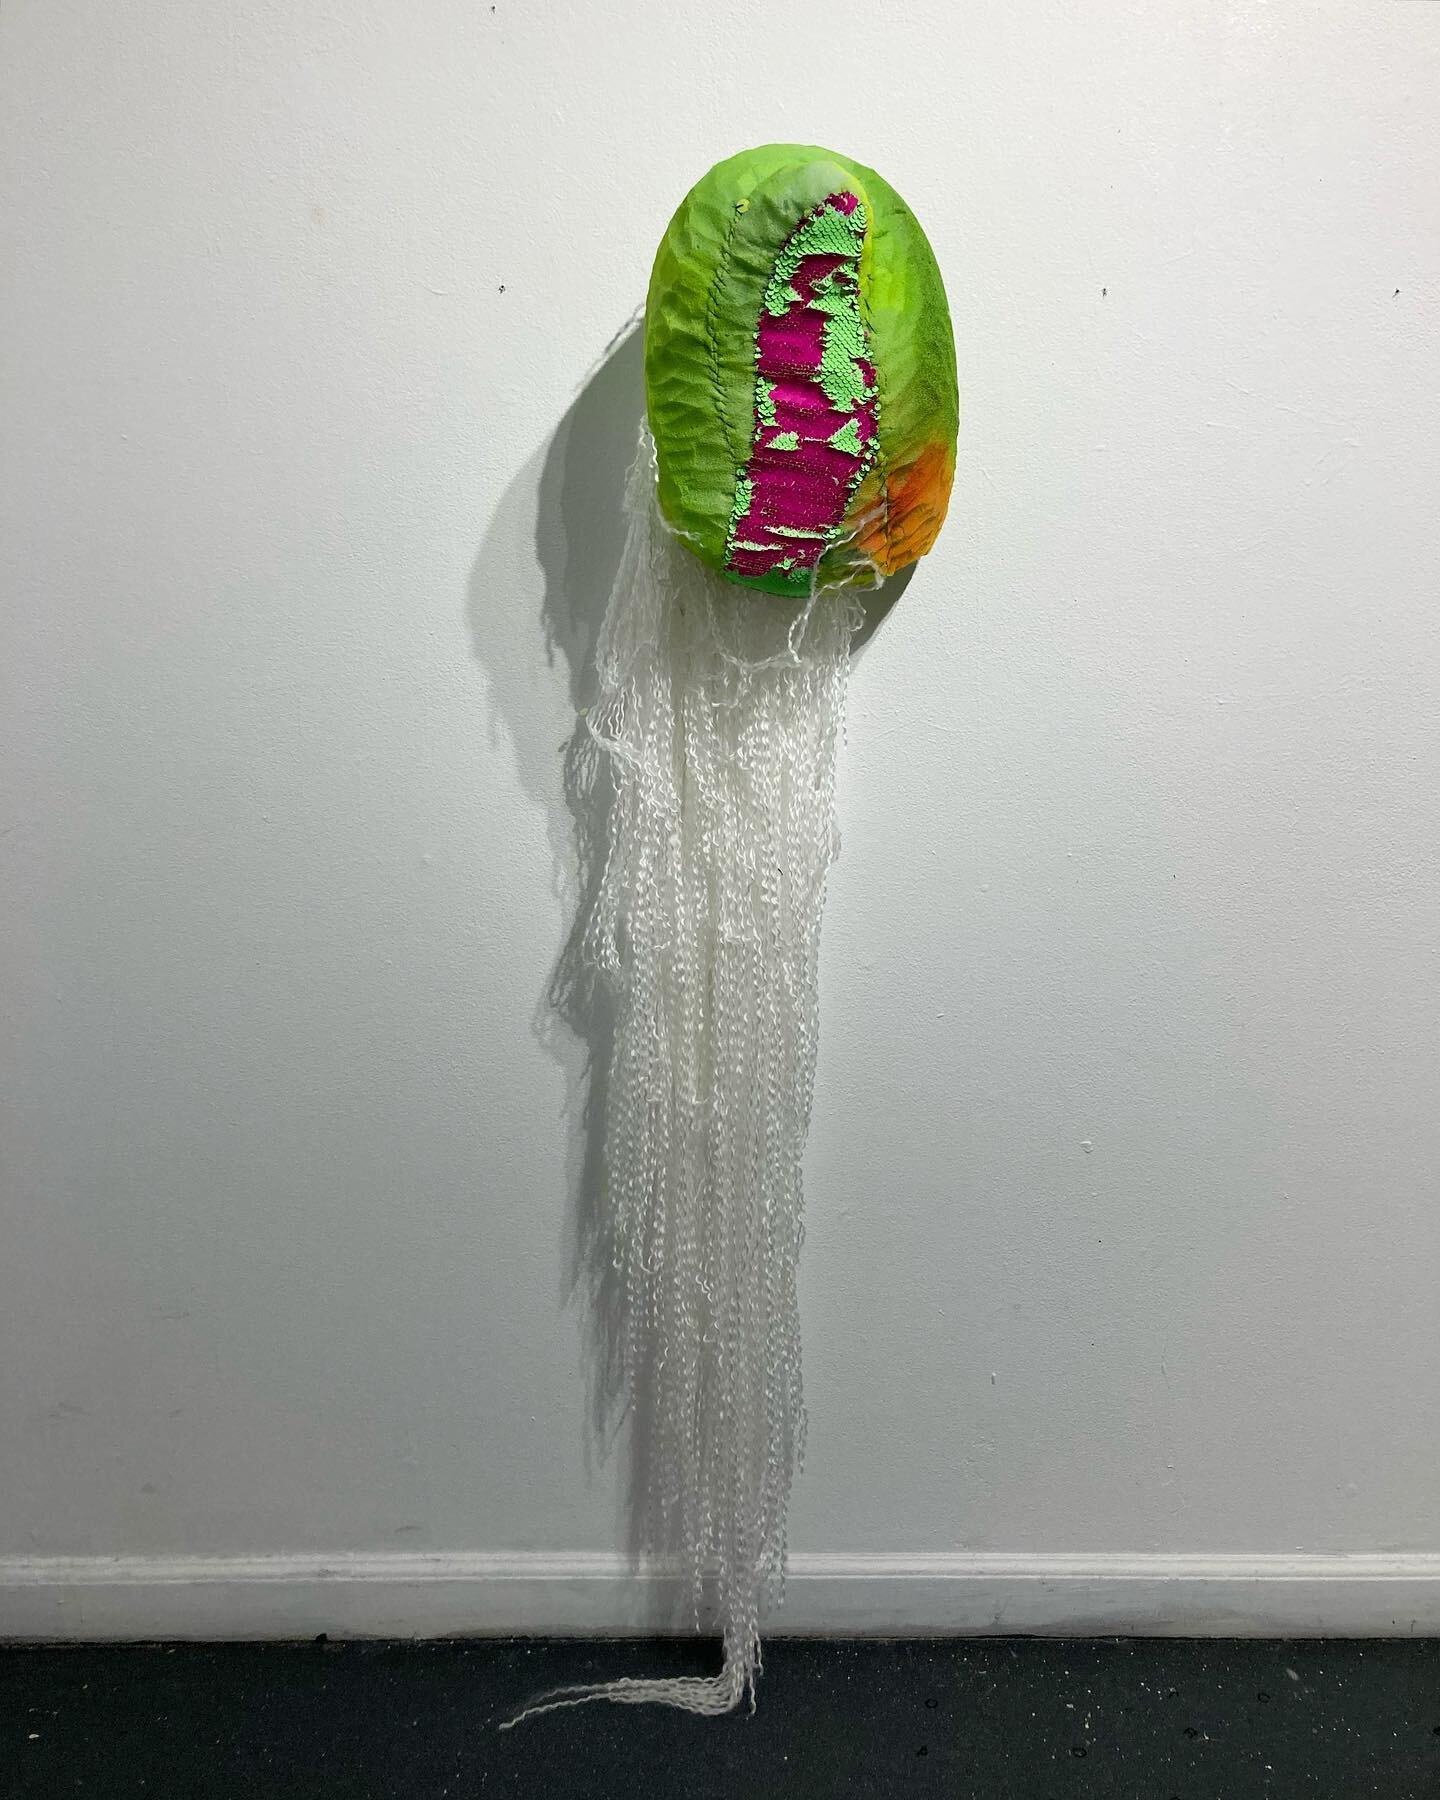 No title yet. Just reinvented this soft sculpture from part of my thesis exhibition. 
.
.
.
#transformationtuesday #reinvented #softsculptures #mixedmediaart #experimentalart #gallery #abstractsculpture #thesis #mfa #studioart